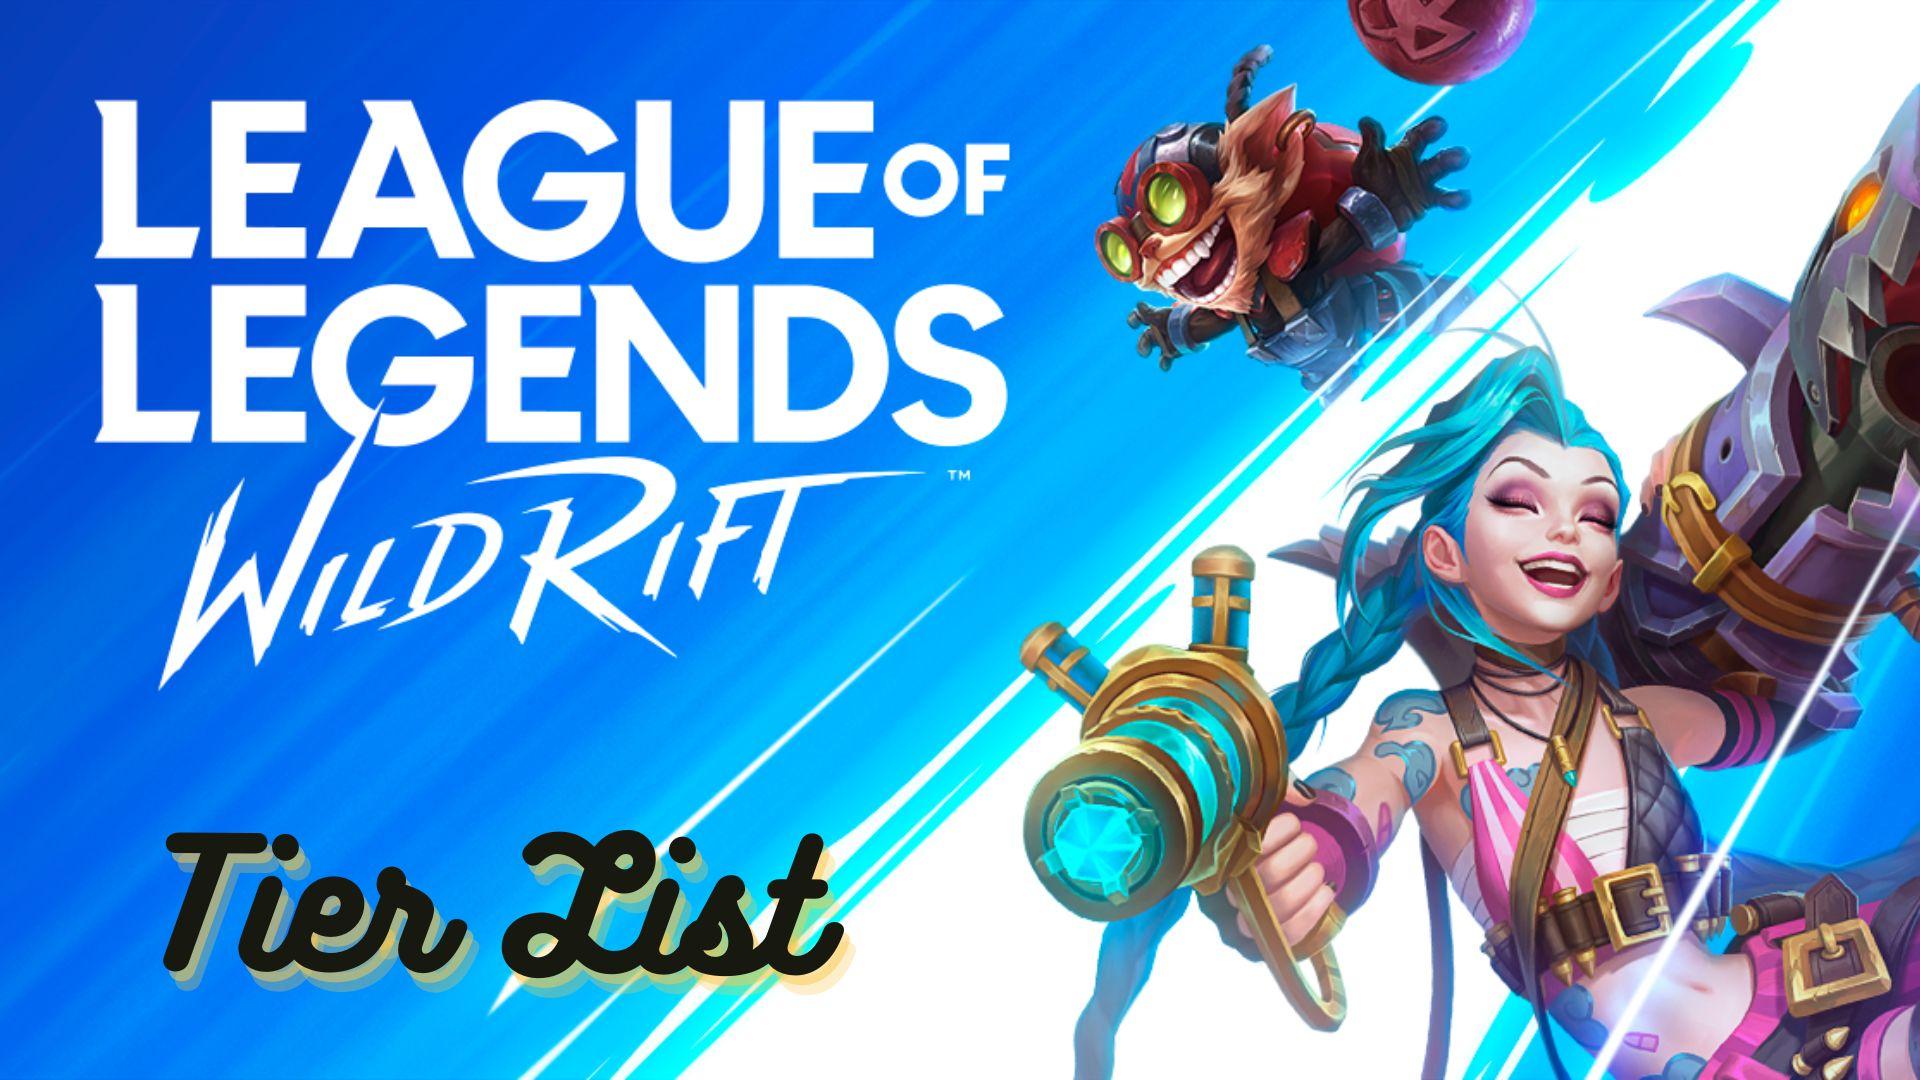 The ultimate Guide to Become Pro in LOL: Wild Rift-Game Guides